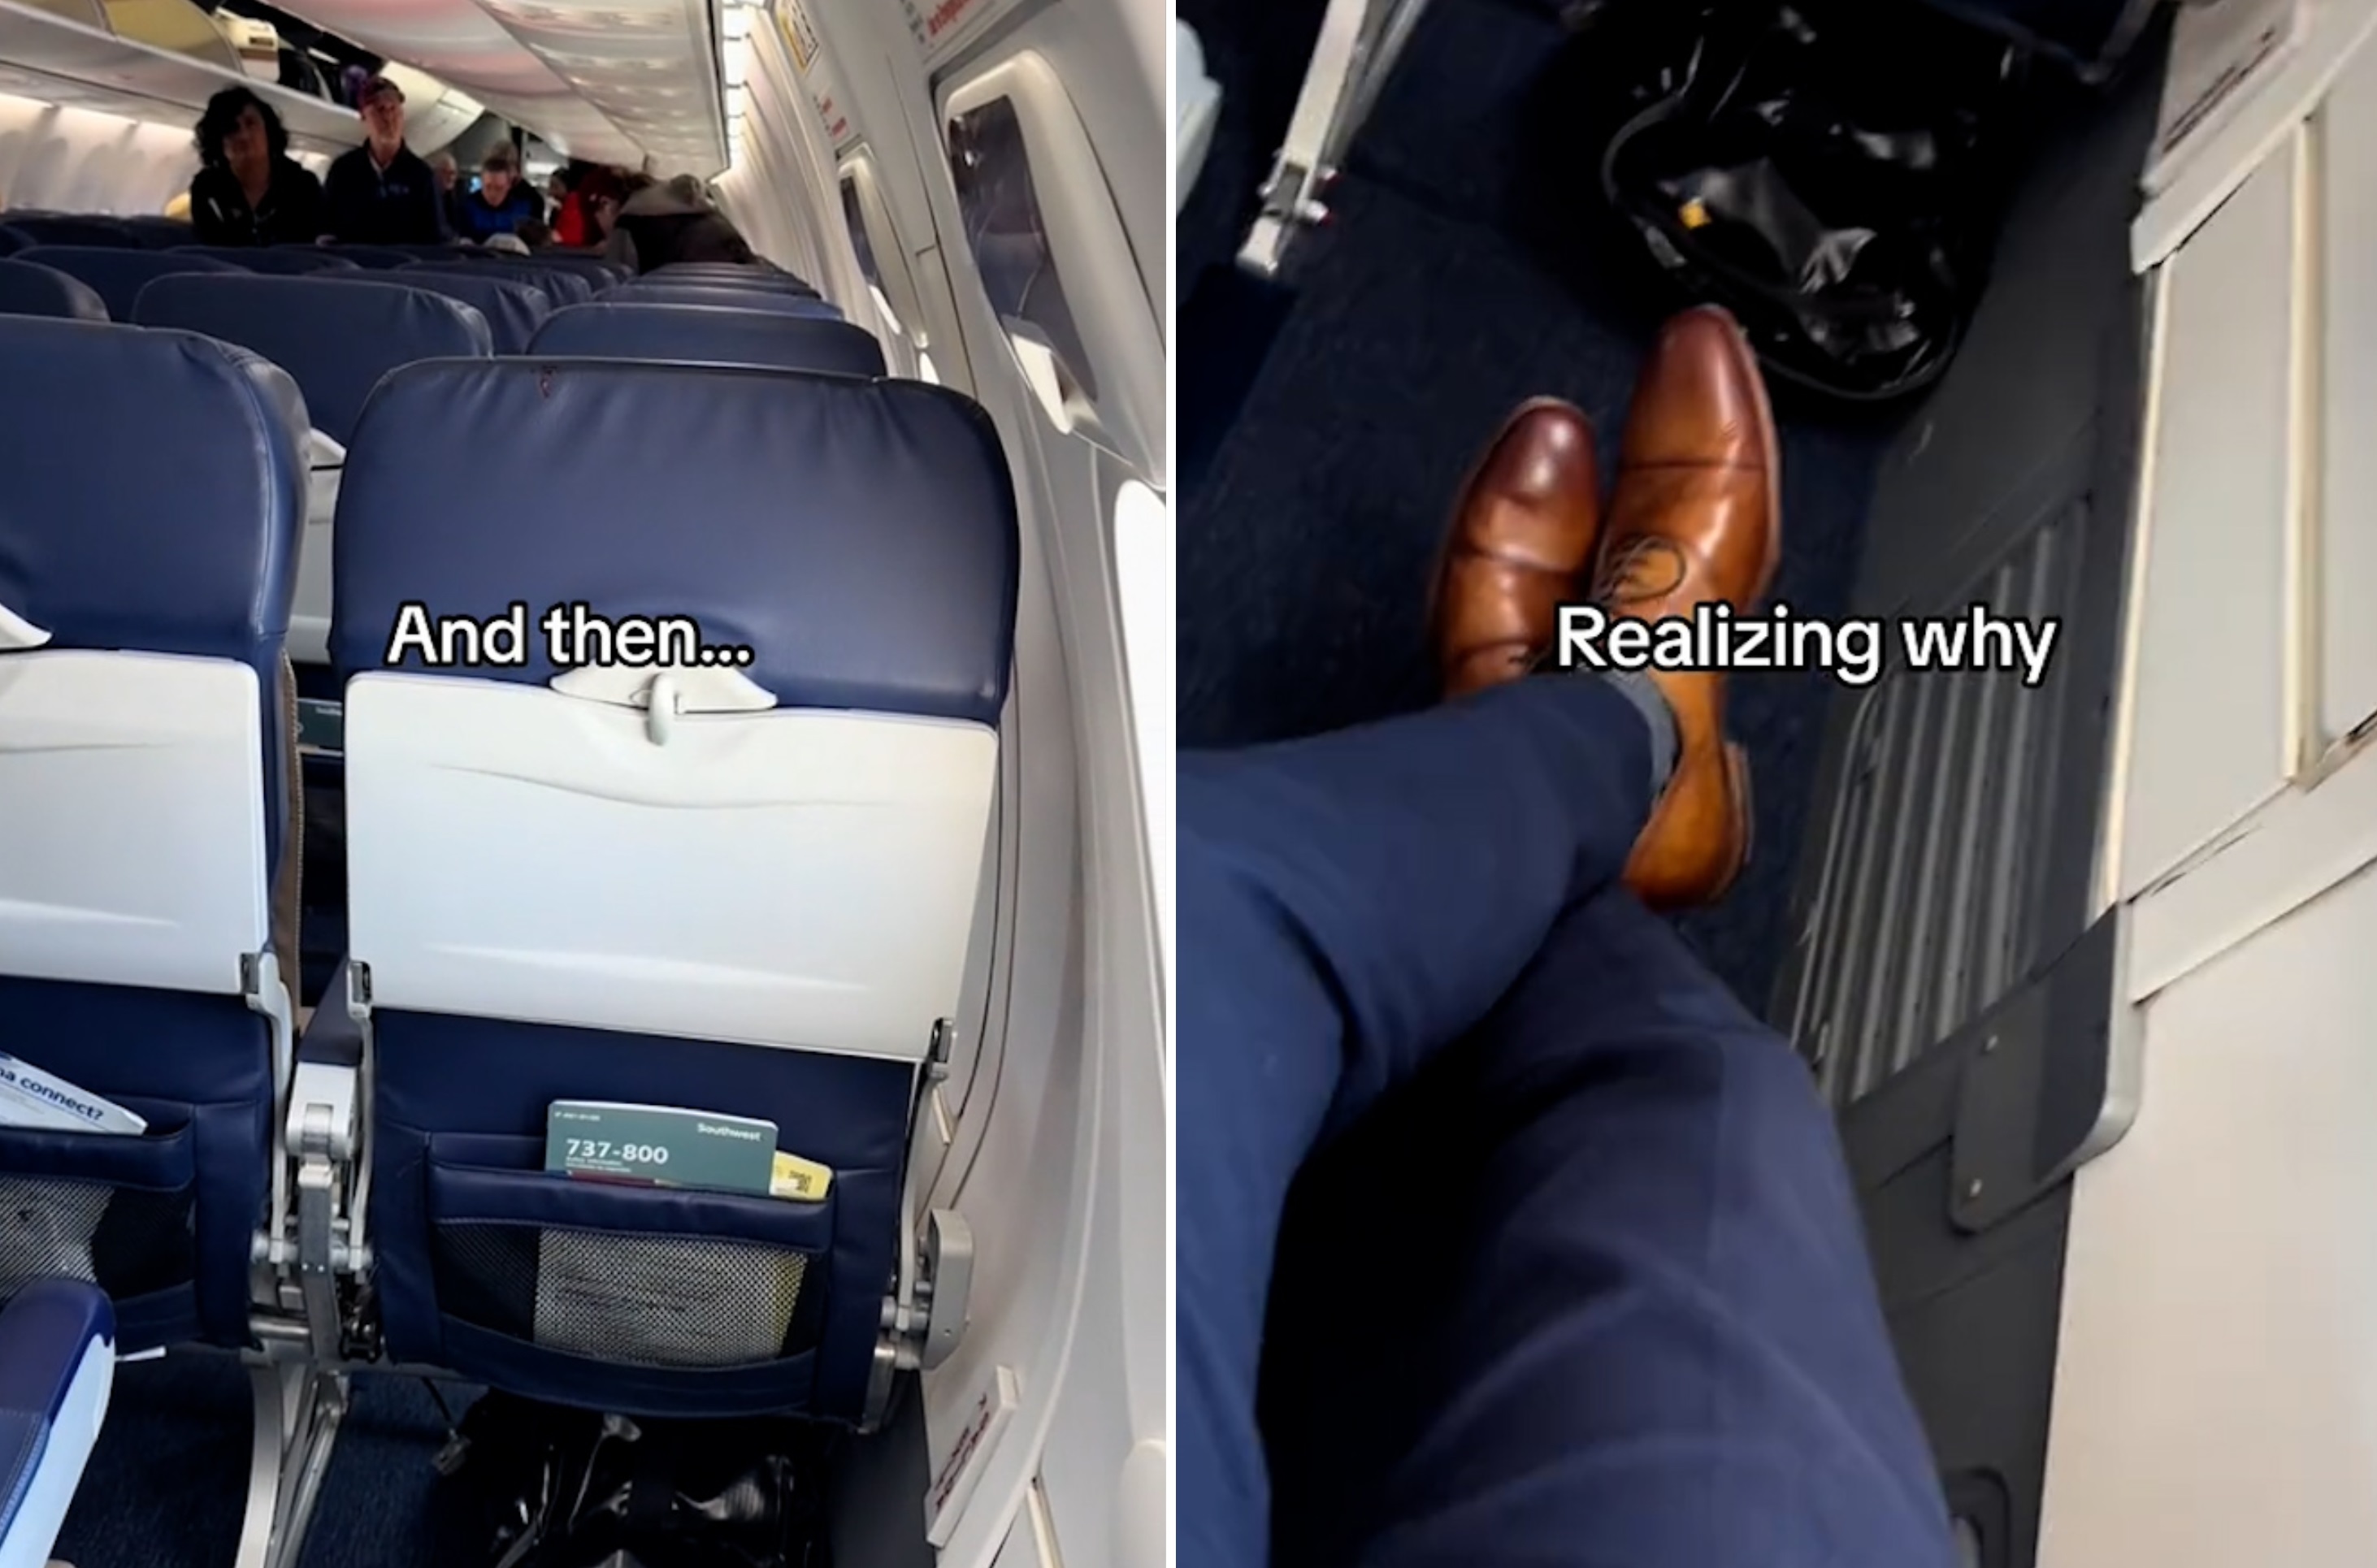 Passenger wonders why no one else is in exit row, then realizes why